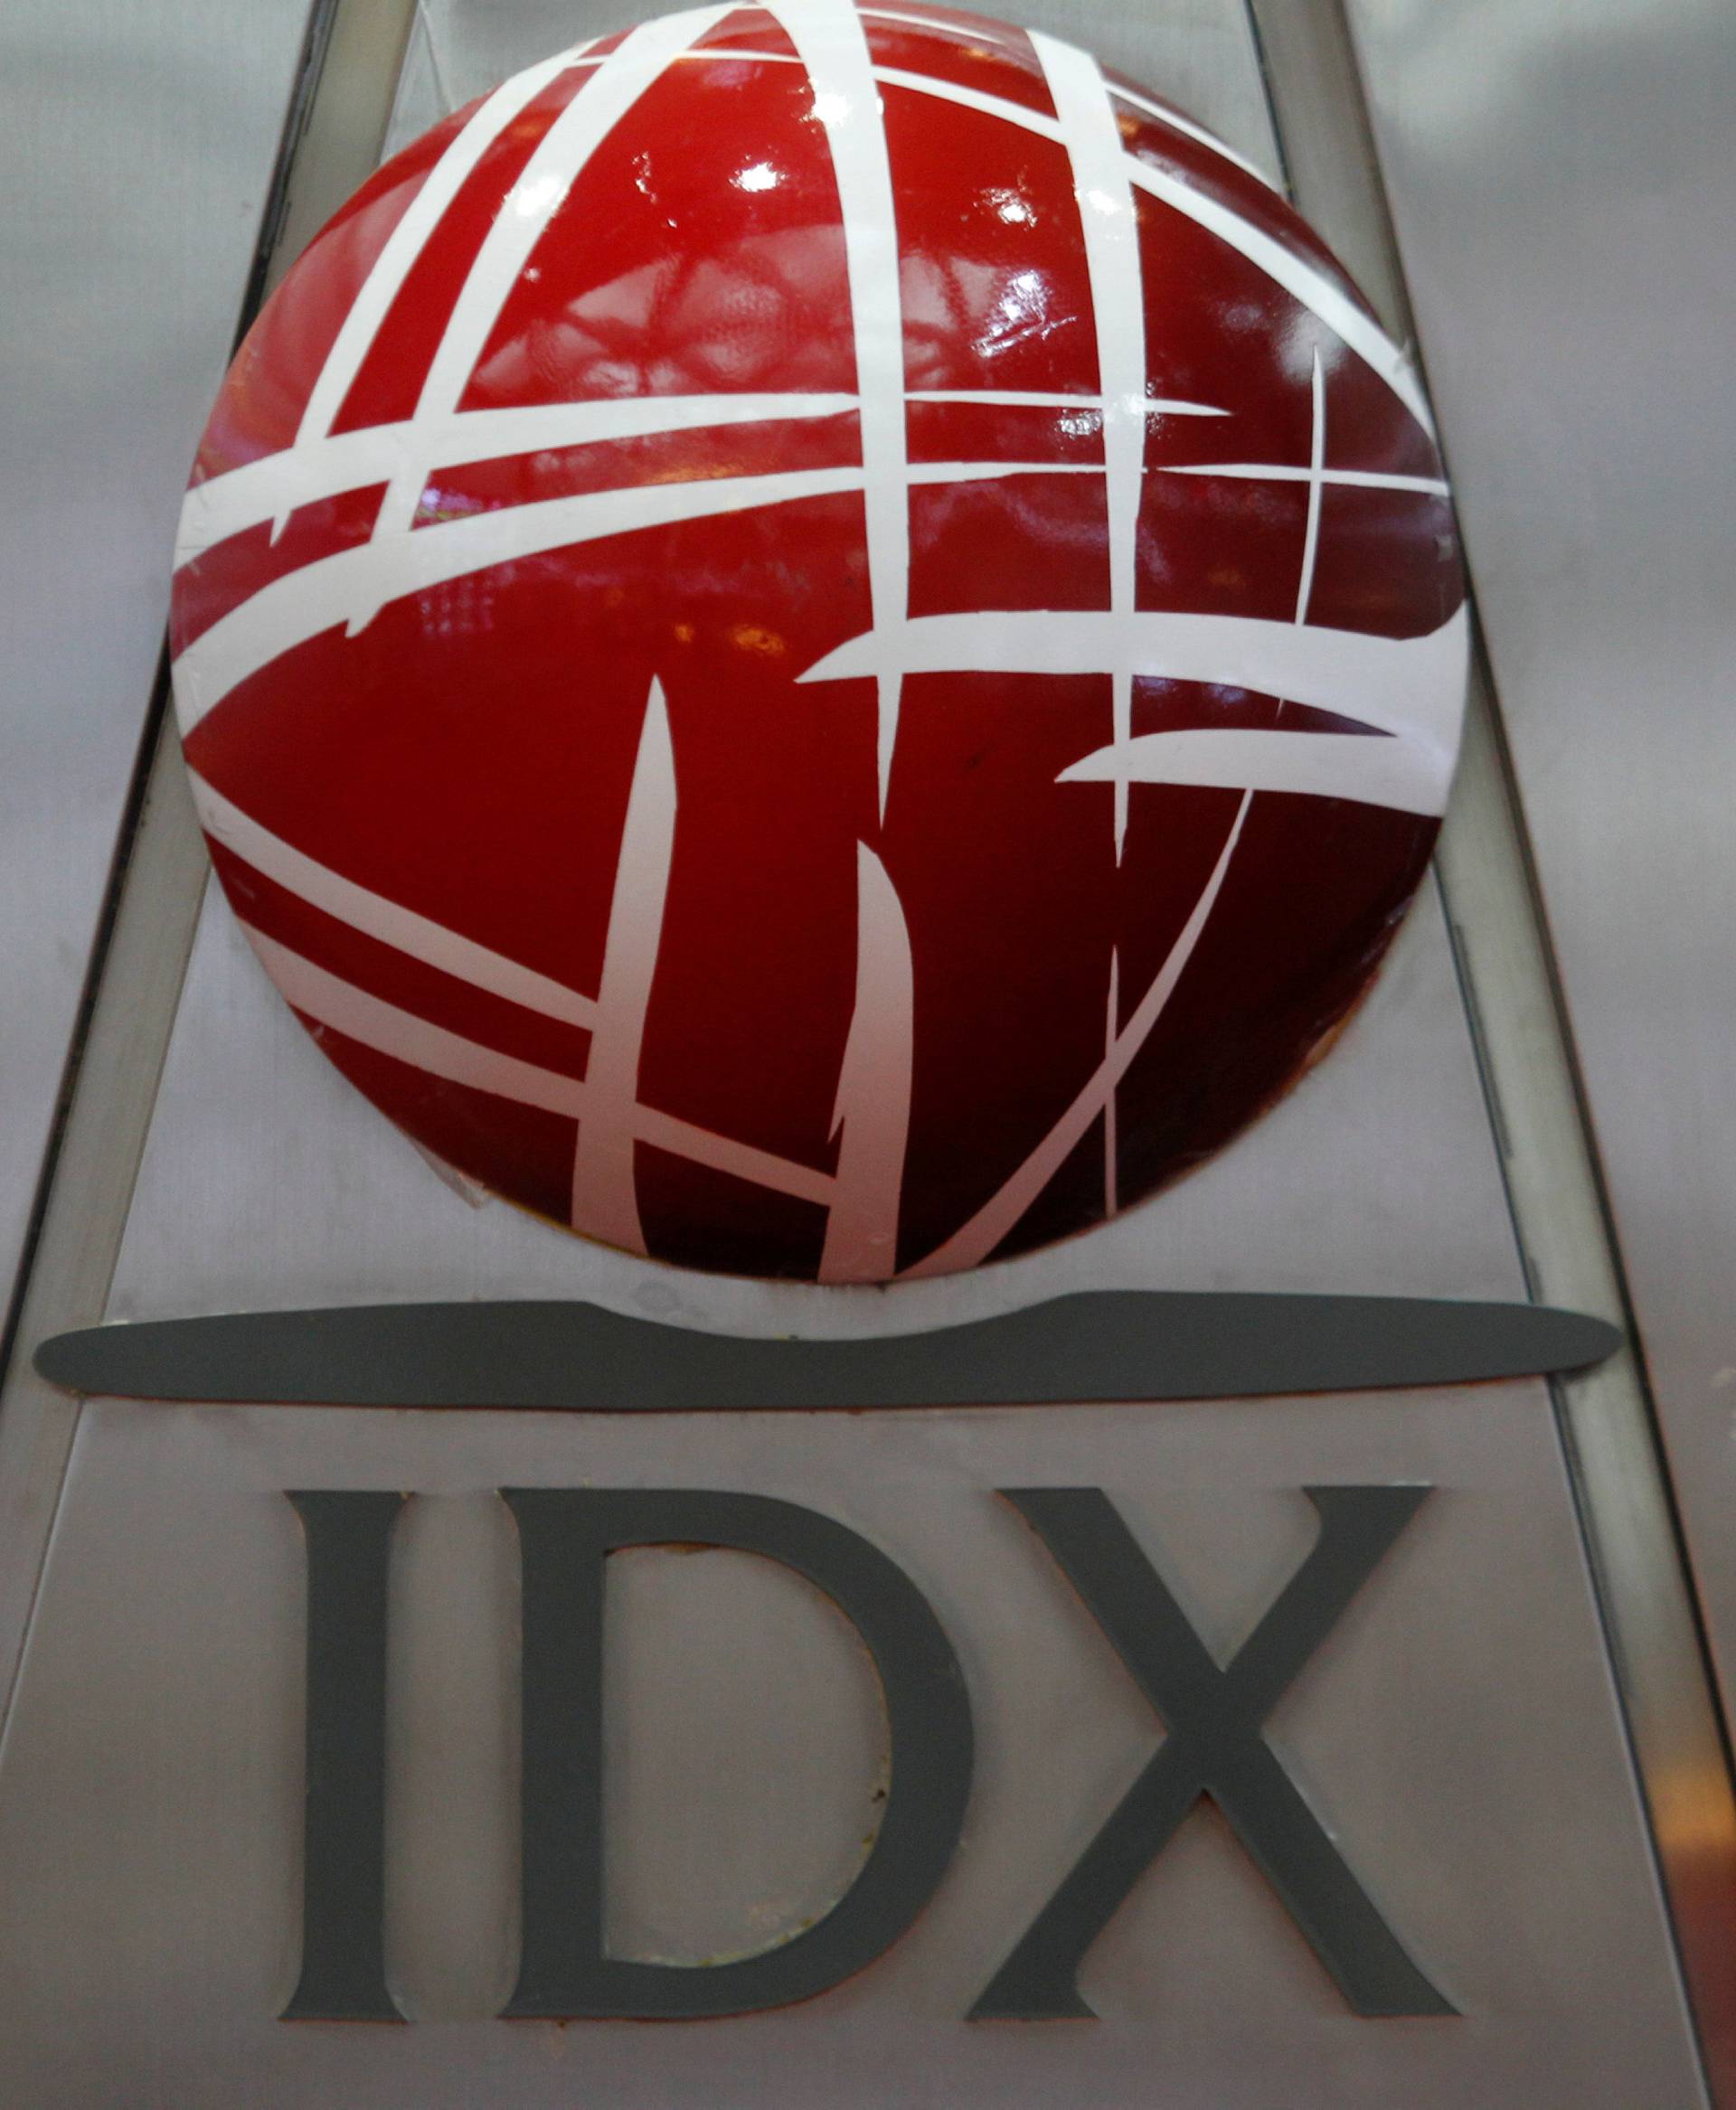 FILE PHOTO: The logo of the Indonesia Stock Exchange is seen inside the building in Jakarta, Indonesia